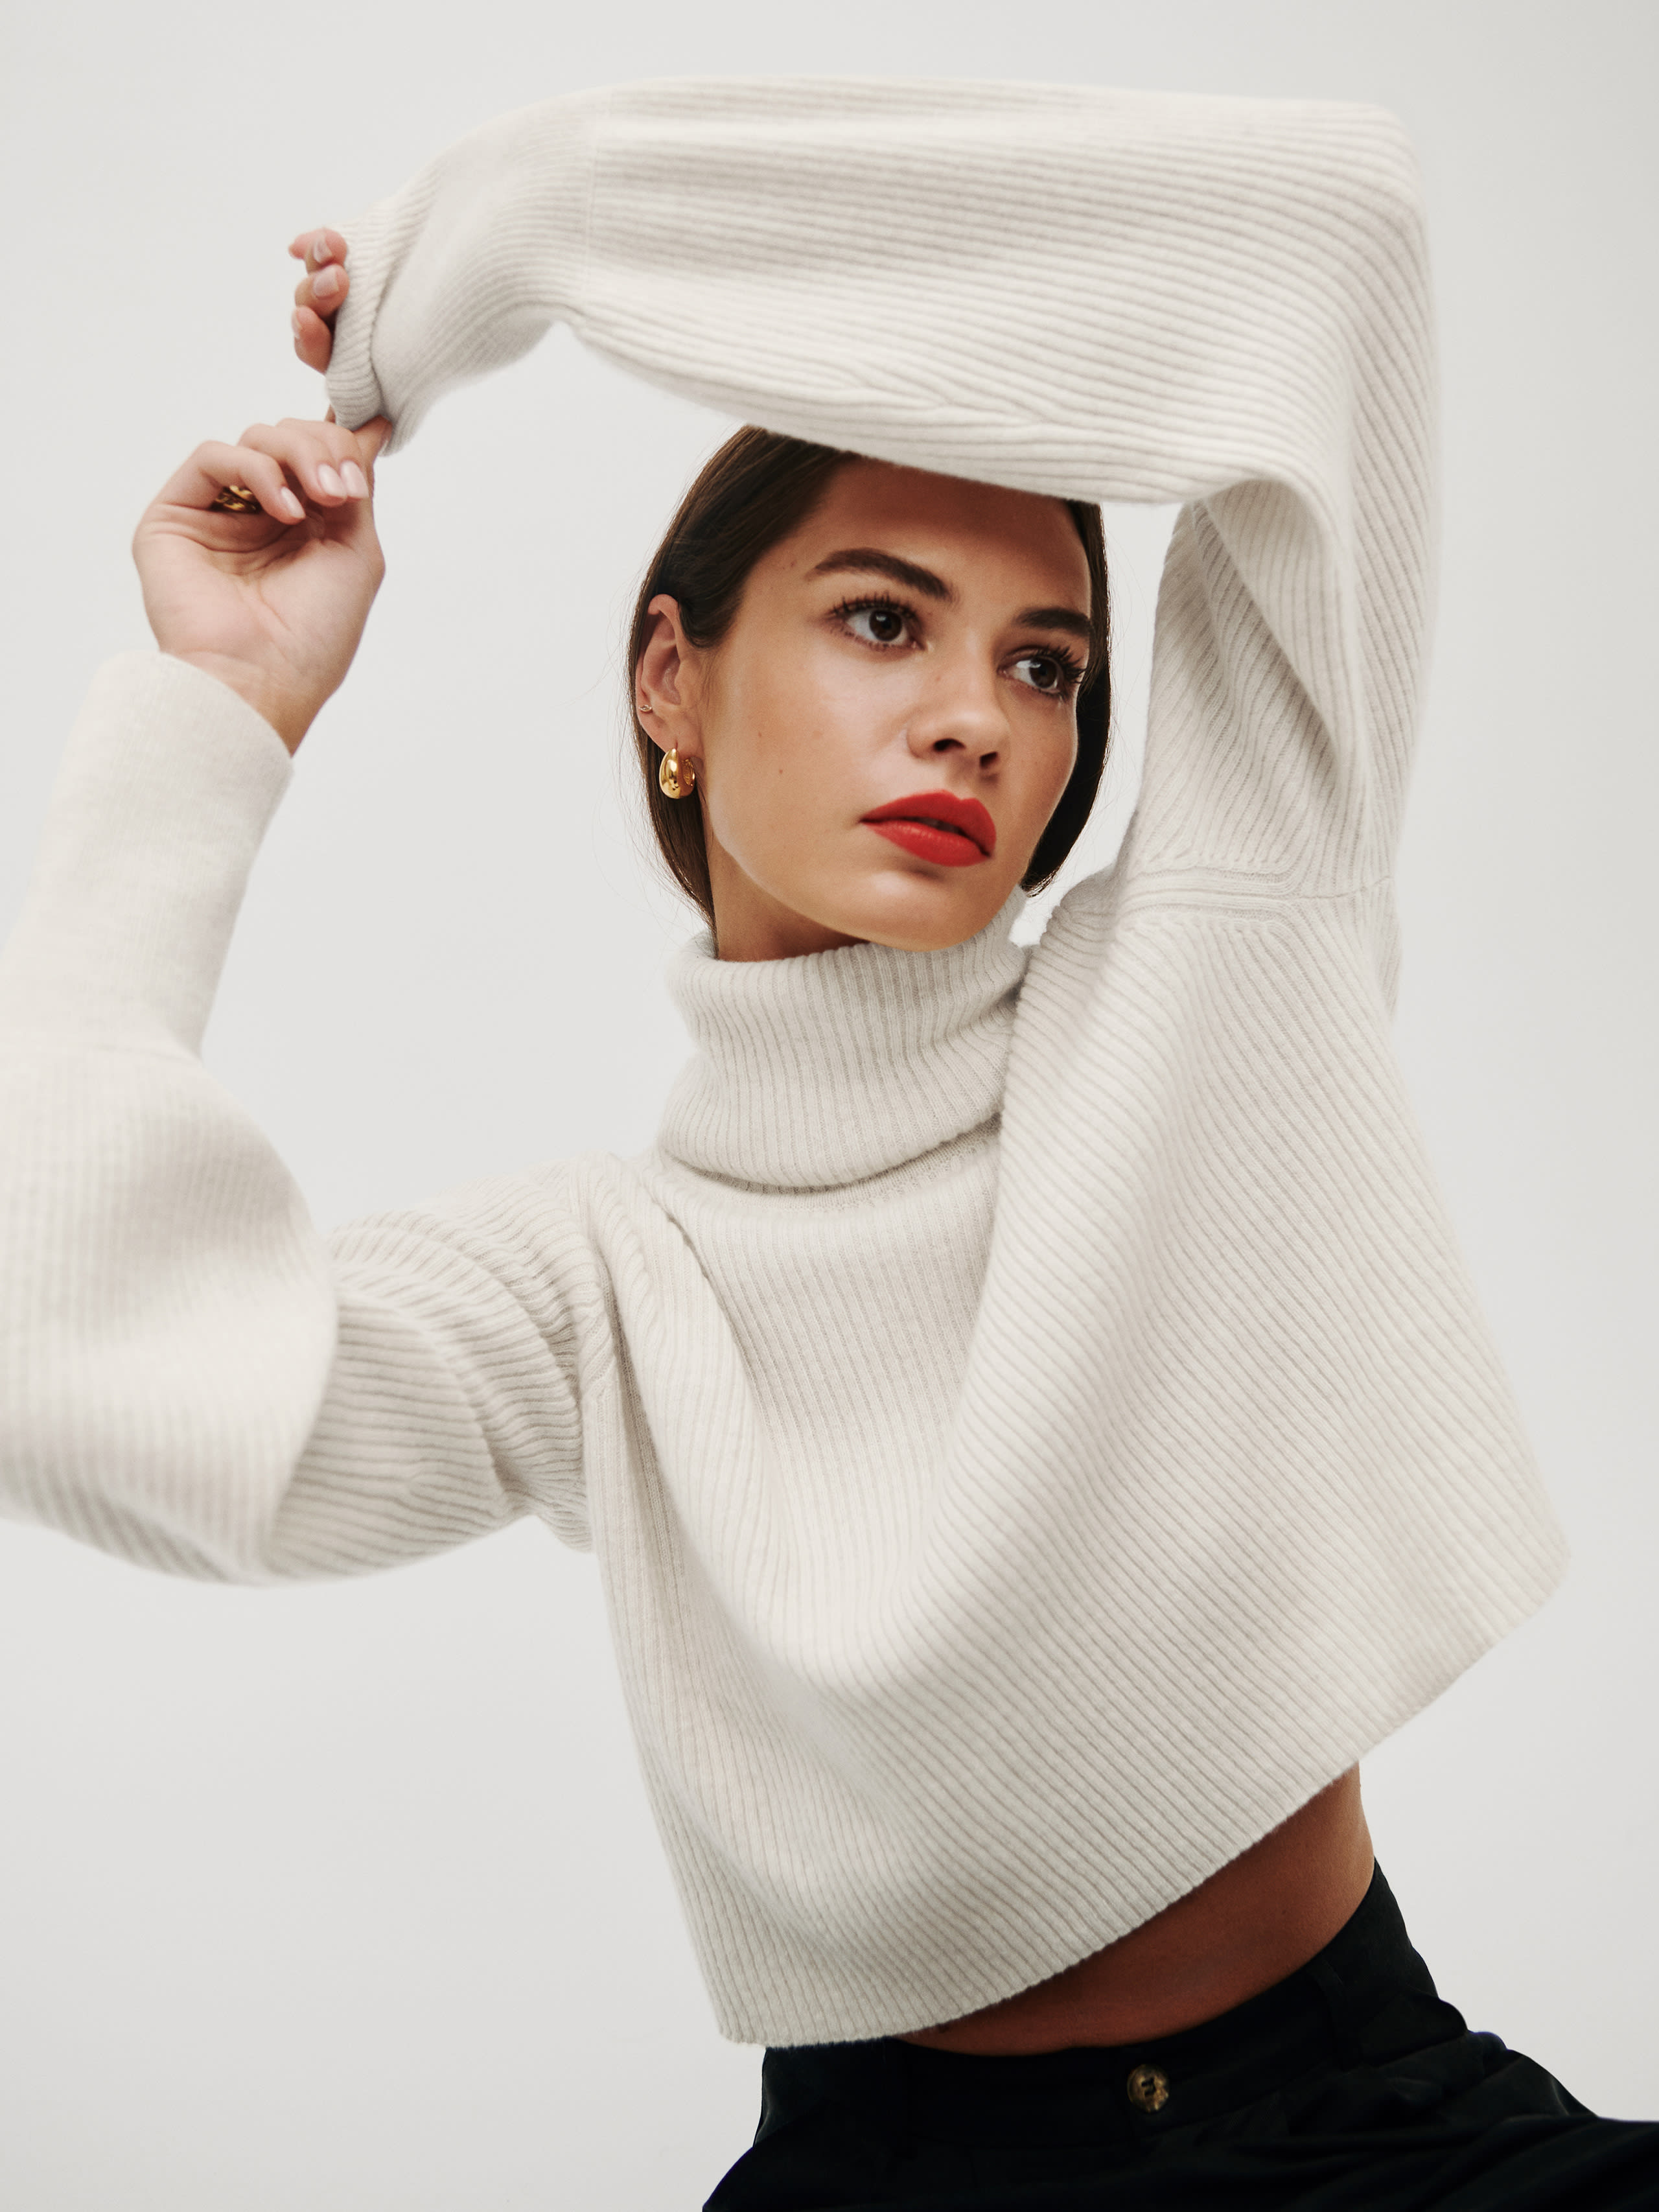 Luisa Cropped Cashmere Sweater, image 1